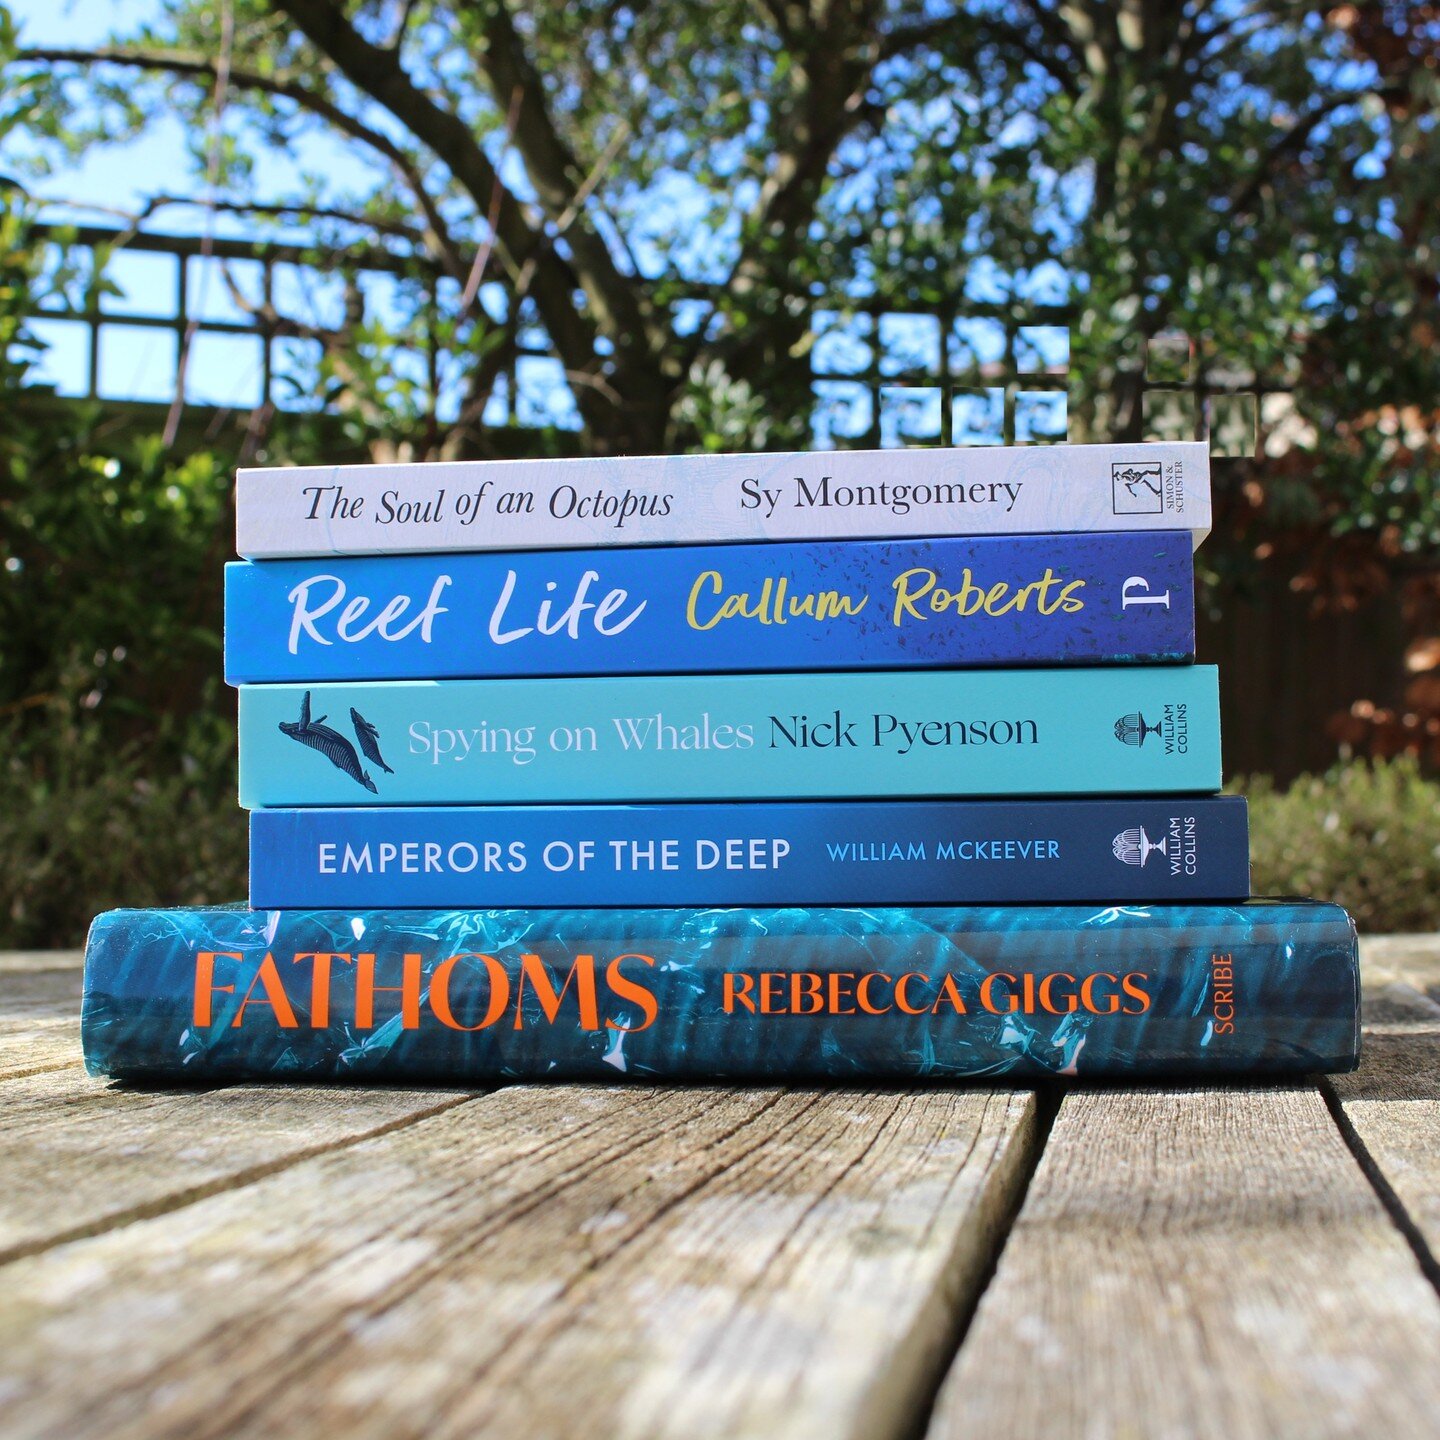 Explore Earth's ocean alongside some of its incredible inhabitants with these wonderful reads! Which of these books are you most drawn to? 🐋 🐙 🦈 🐠 🌊
.
.
.
#bookstagram #bookshop #naturereads #oceanreads #books #bookphotography #onlinebookshop #s